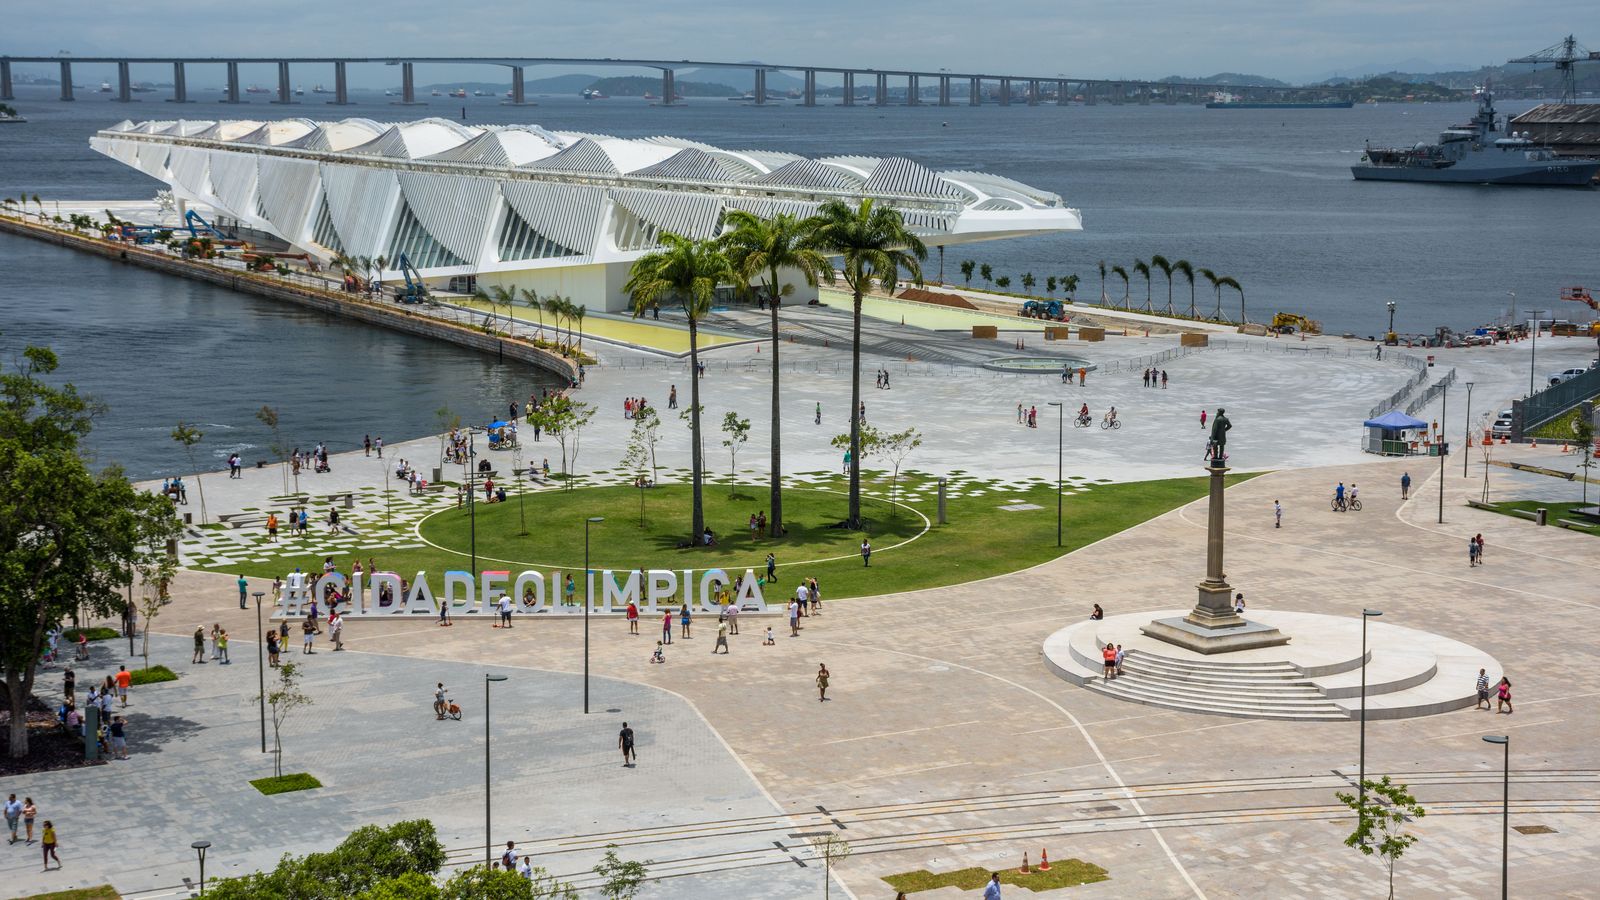 Top 10 Modern City Squares In The World